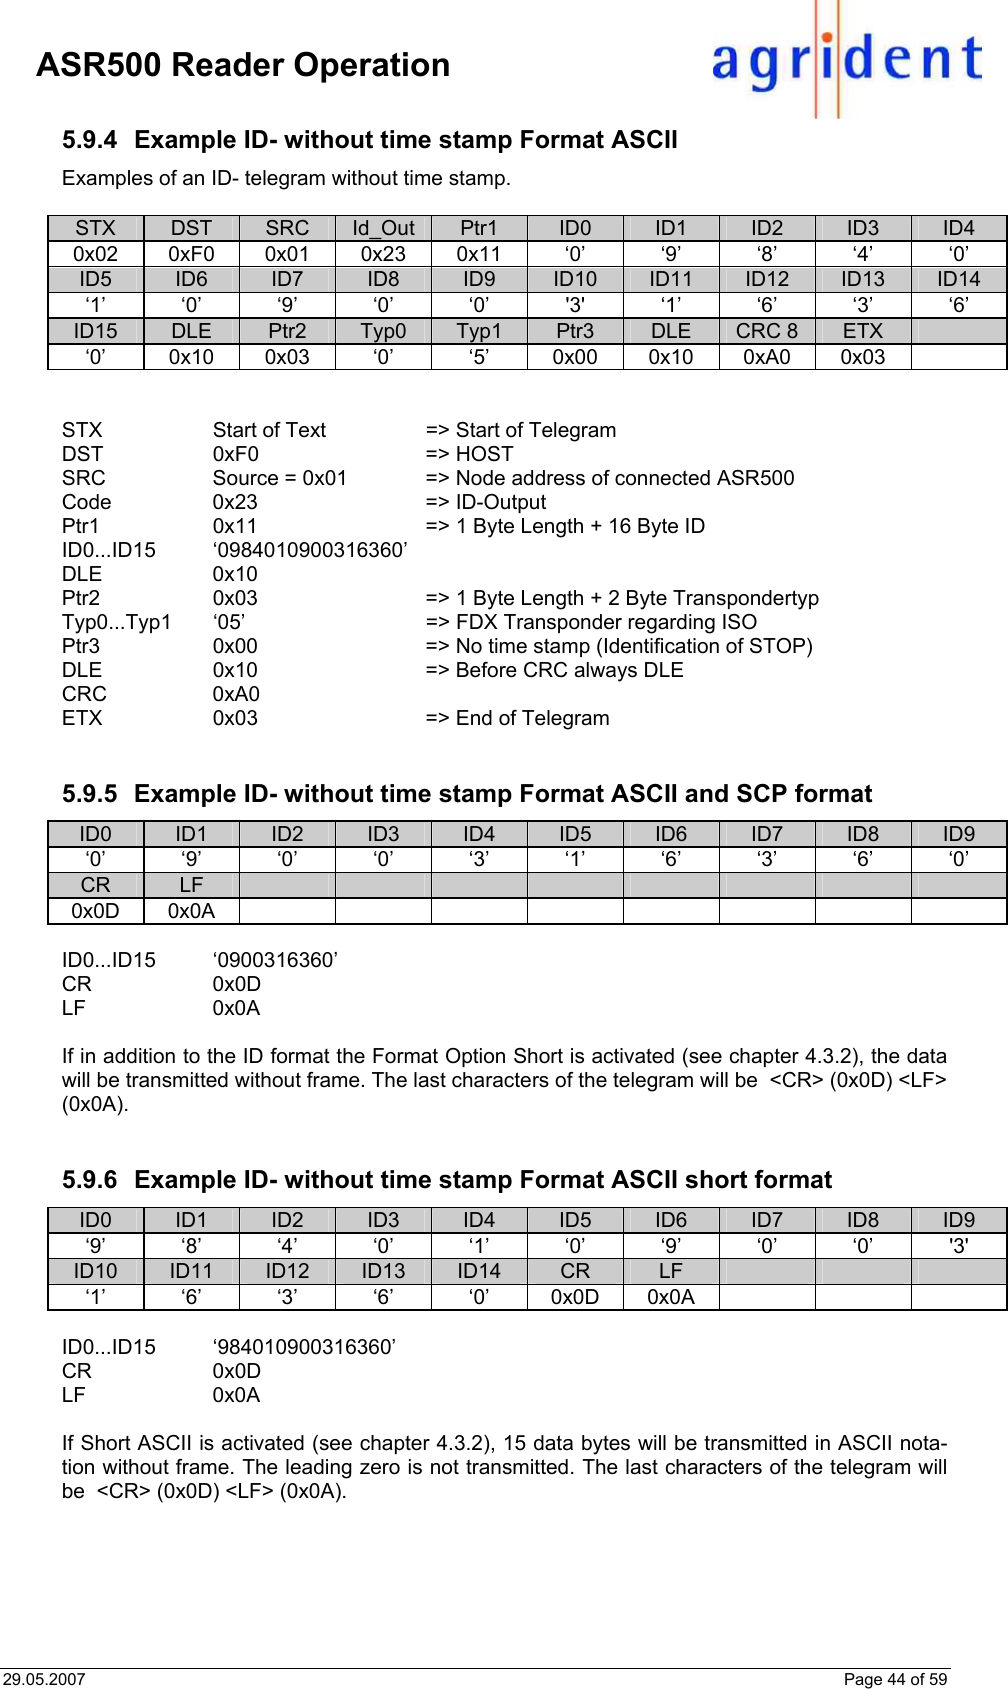 29.05.2007    Page 44 of 59     ASR500 Reader Operation 5.9.4  Example ID- without time stamp Format ASCII Examples of an ID- telegram without time stamp.  STX  DST  SRC  Id_Out  Ptr1  ID0  ID1  ID2  ID3  ID4 0x02 0xF0 0x01 0x23 0x11 ‘0’ ‘9’ ‘8’ ‘4’ ‘0’ ID5  ID6  ID7  ID8  ID9  ID10  ID11  ID12  ID13  ID14 ‘1’ ‘0’ ‘9’ ‘0’ ‘0’ &apos;3&apos; ‘1’ ‘6’ ‘3’ ‘6’ ID15  DLE  Ptr2  Typ0  Typ1  Ptr3  DLE  CRC 8  ETX   ‘0’ 0x10 0x03 ‘0’  ‘5’ 0x00 0x10 0xA0 0x03     STX  Start of Text   =&gt; Start of Telegram DST  0xF0   =&gt; HOST SRC  Source = 0x01   =&gt; Node address of connected ASR500 Code 0x23  =&gt; ID-Output Ptr1  0x11  =&gt; 1 Byte Length + 16 Byte ID ID0...ID15 ‘0984010900316360’ DLE 0x10   Ptr2  0x03  =&gt; 1 Byte Length + 2 Byte Transpondertyp Typ0...Typ1  ‘05’  =&gt; FDX Transponder regarding ISO Ptr3  0x00  =&gt; No time stamp (Identification of STOP) DLE  0x10  =&gt; Before CRC always DLE CRC 0xA0 ETX  0x03  =&gt; End of Telegram   5.9.5  Example ID- without time stamp Format ASCII and SCP format ID0  ID1  ID2  ID3  ID4  ID5  ID6  ID7  ID8  ID9 ‘0’ ‘9’ ‘0’ ‘0’ ‘3’ ‘1’ ‘6’ ‘3’ ‘6’ ‘0’ CR  LF                 0x0D 0x0A          ID0...ID15 ‘0900316360’ CR 0x0D   LF 0x0A    If in addition to the ID format the Format Option Short is activated (see chapter 4.3.2), the data will be transmitted without frame. The last characters of the telegram will be  &lt;CR&gt; (0x0D) &lt;LF&gt; (0x0A).   5.9.6  Example ID- without time stamp Format ASCII short format ID0  ID1  ID2  ID3  ID4  ID5  ID6  ID7  ID8  ID9 ‘9’ ‘8’ ‘4’ ‘0’ ‘1’ ‘0’ ‘9’ ‘0’ ‘0’ &apos;3&apos; ID10  ID11  ID12  ID13  ID14  CR  LF       ‘1’ ‘6’ ‘3’ ‘6’ ‘0’ 0x0D 0x0A       ID0...ID15 ‘984010900316360’ CR 0x0D   LF 0x0A    If Short ASCII is activated (see chapter 4.3.2), 15 data bytes will be transmitted in ASCII nota-tion without frame. The leading zero is not transmitted. The last characters of the telegram will be  &lt;CR&gt; (0x0D) &lt;LF&gt; (0x0A). 